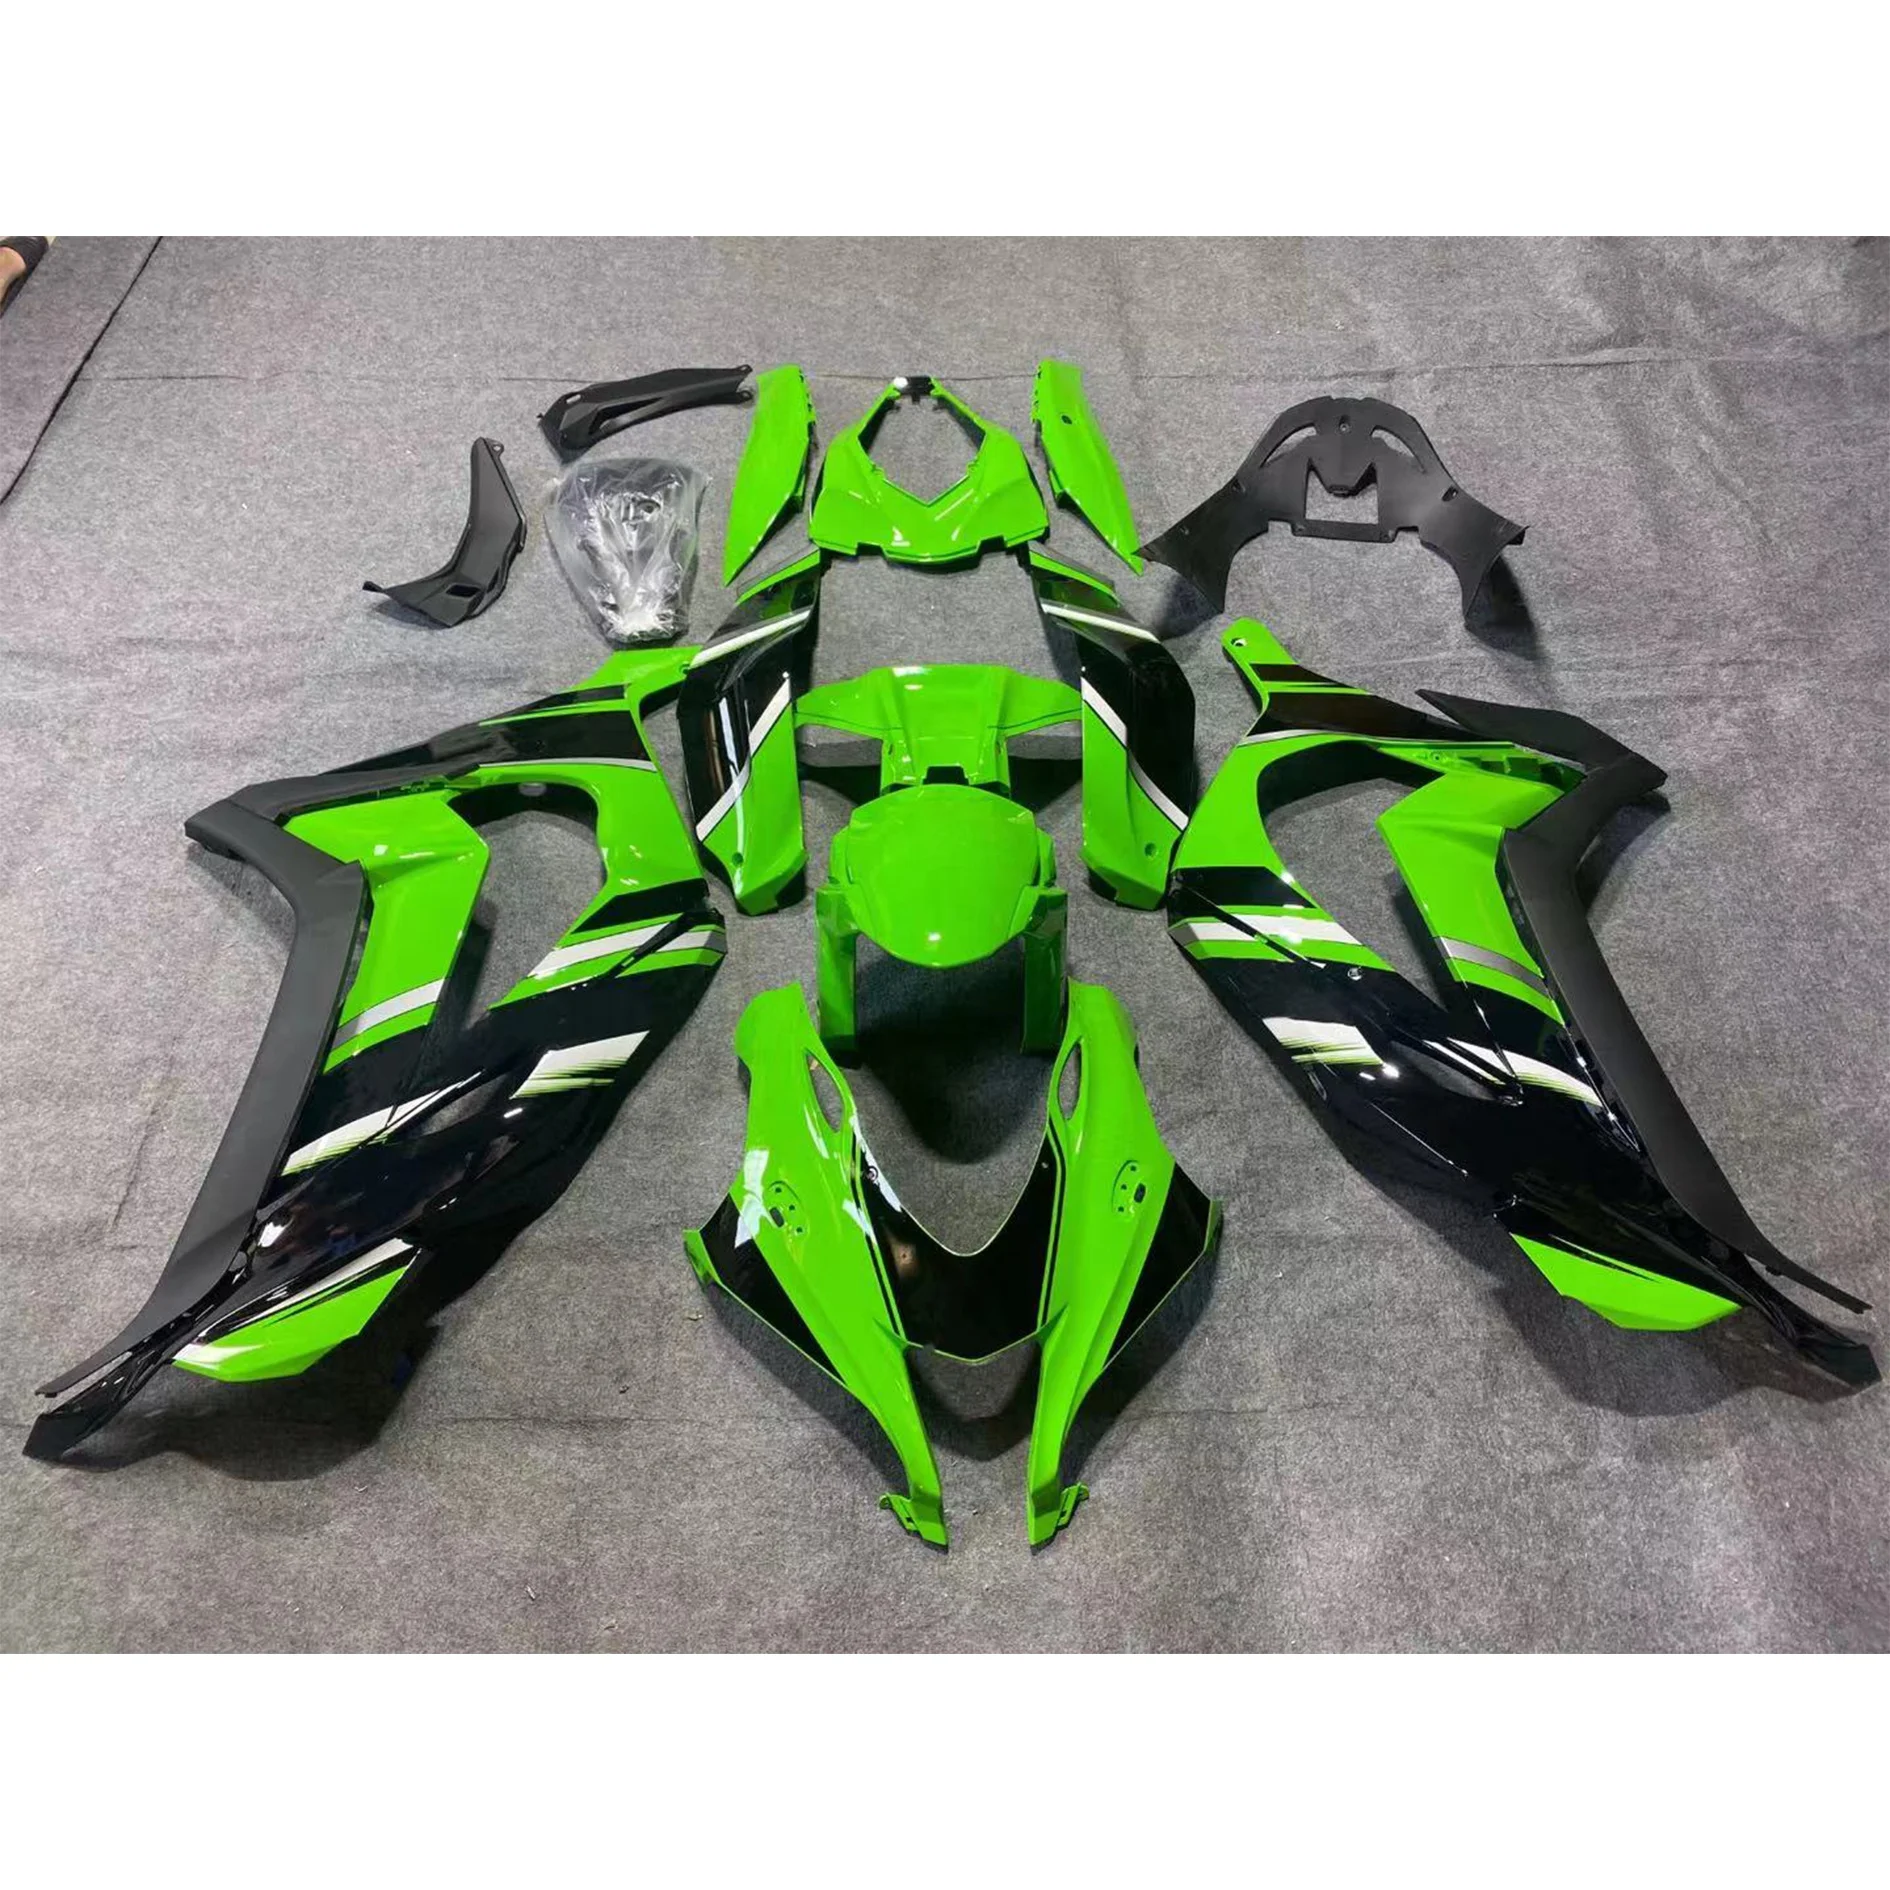 

2021 WHSC Green And Black Motorcycle Accessories For KAWASAKI ZX-10R 2016-2020 Custom Cover Body ABS Plastic Fairings Kit, Pictures shown